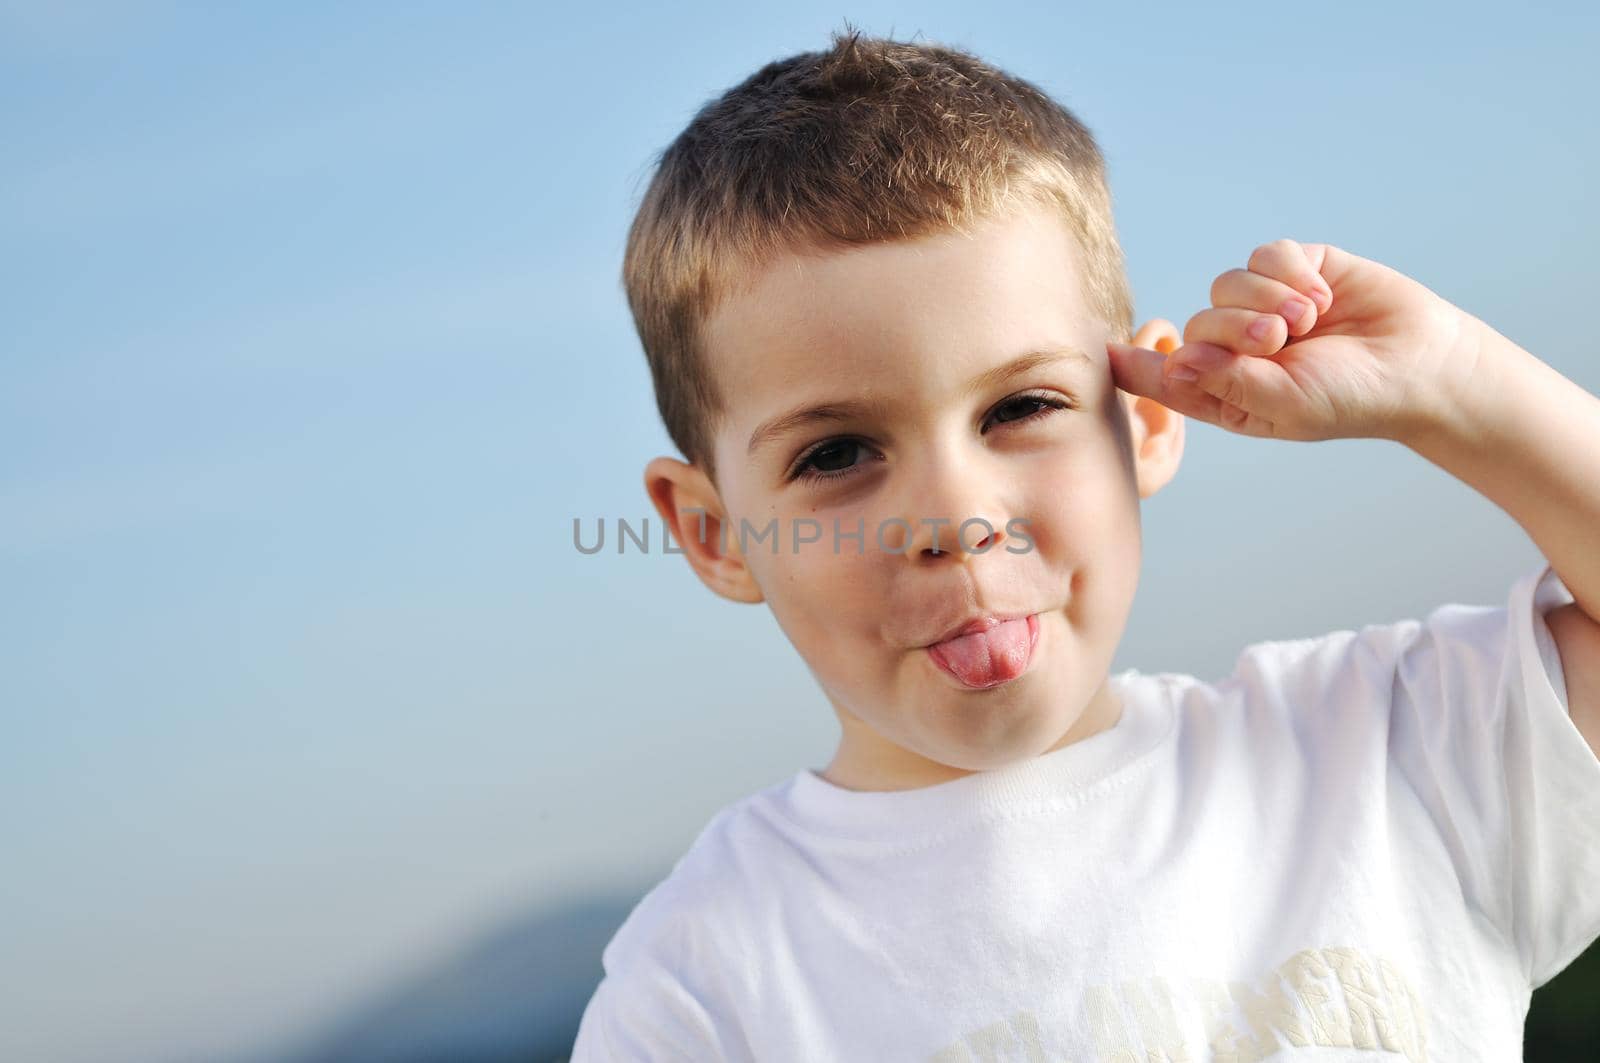 happy young boy child outdoor portrait